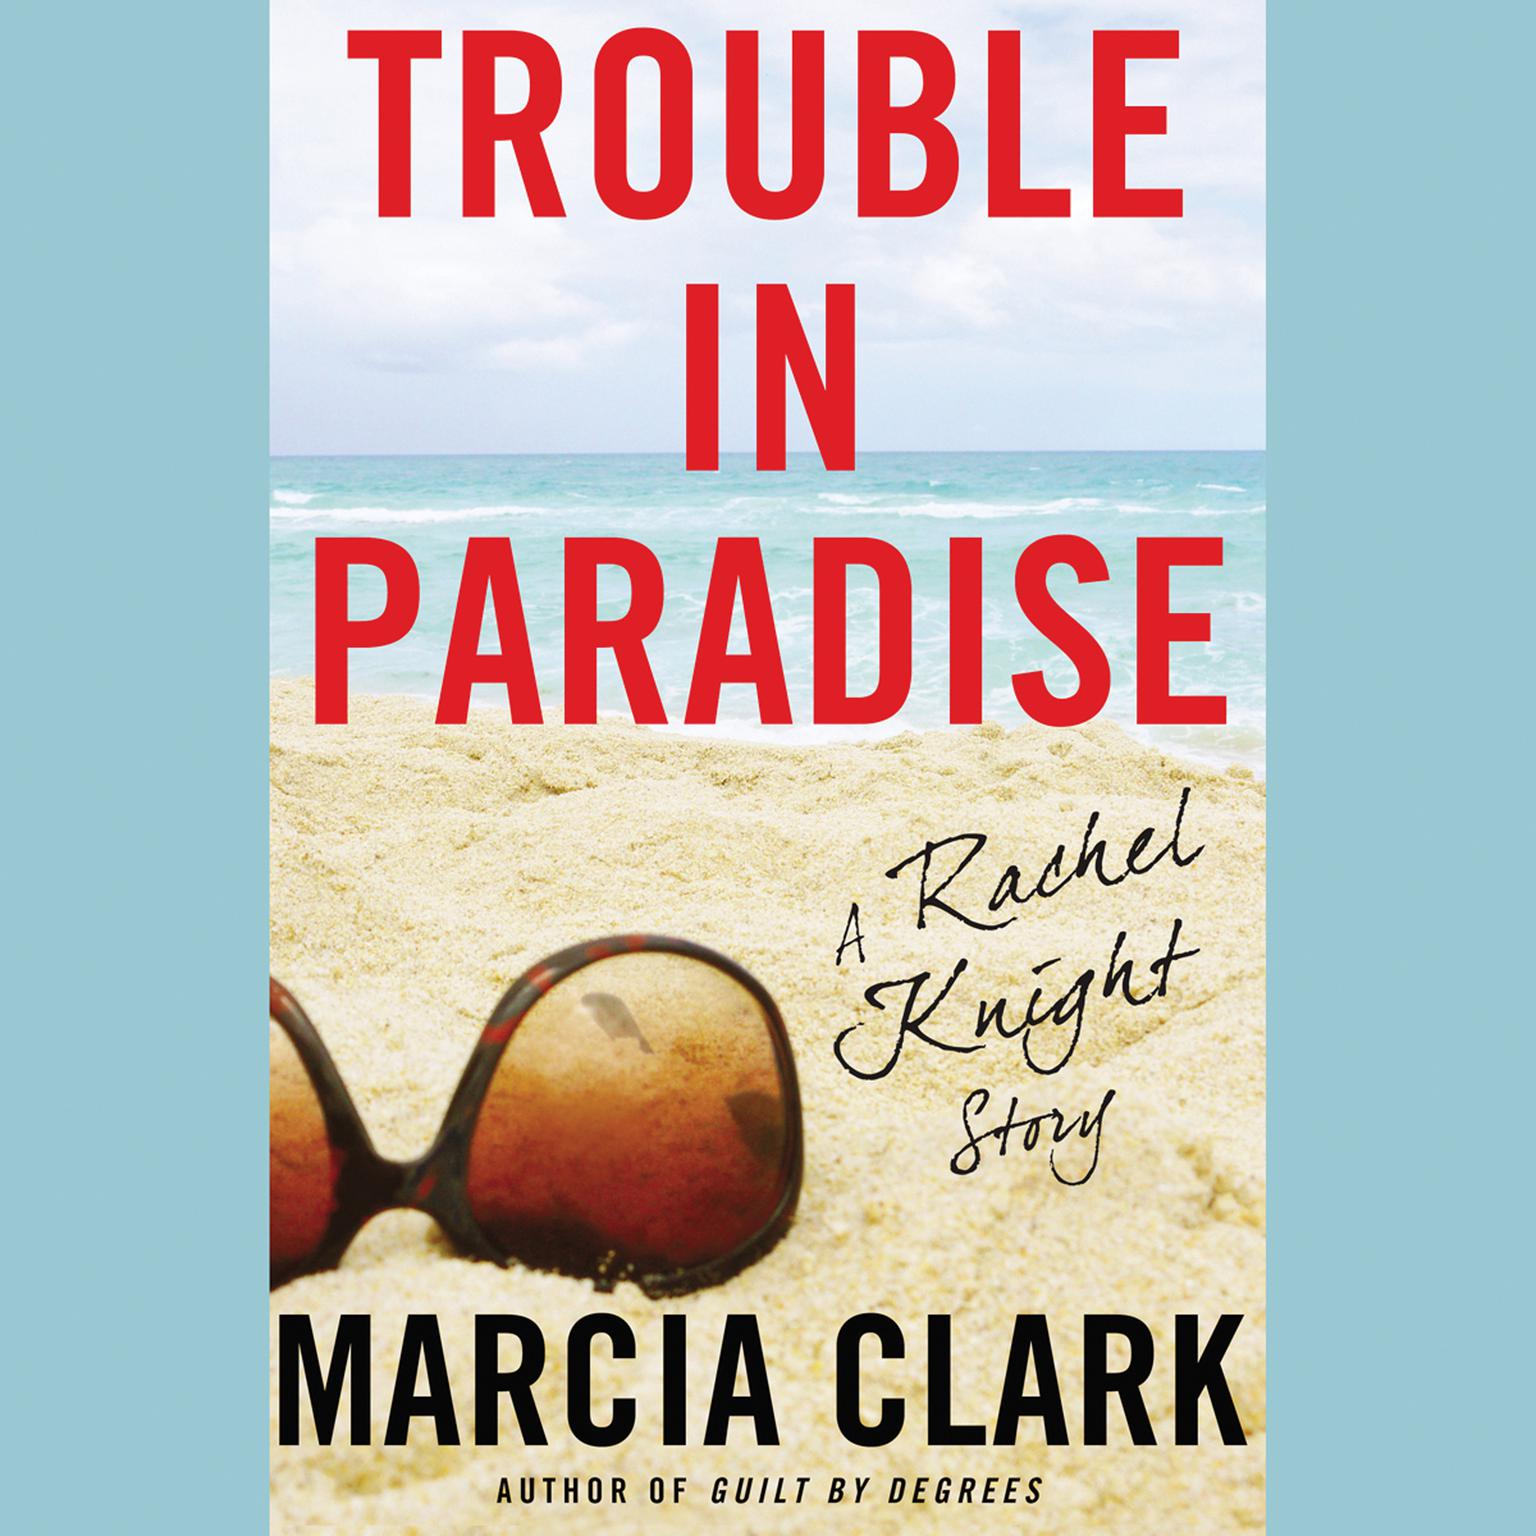 Trouble in Paradise: A Rachel Knight Story Audiobook, by Marcia Clark